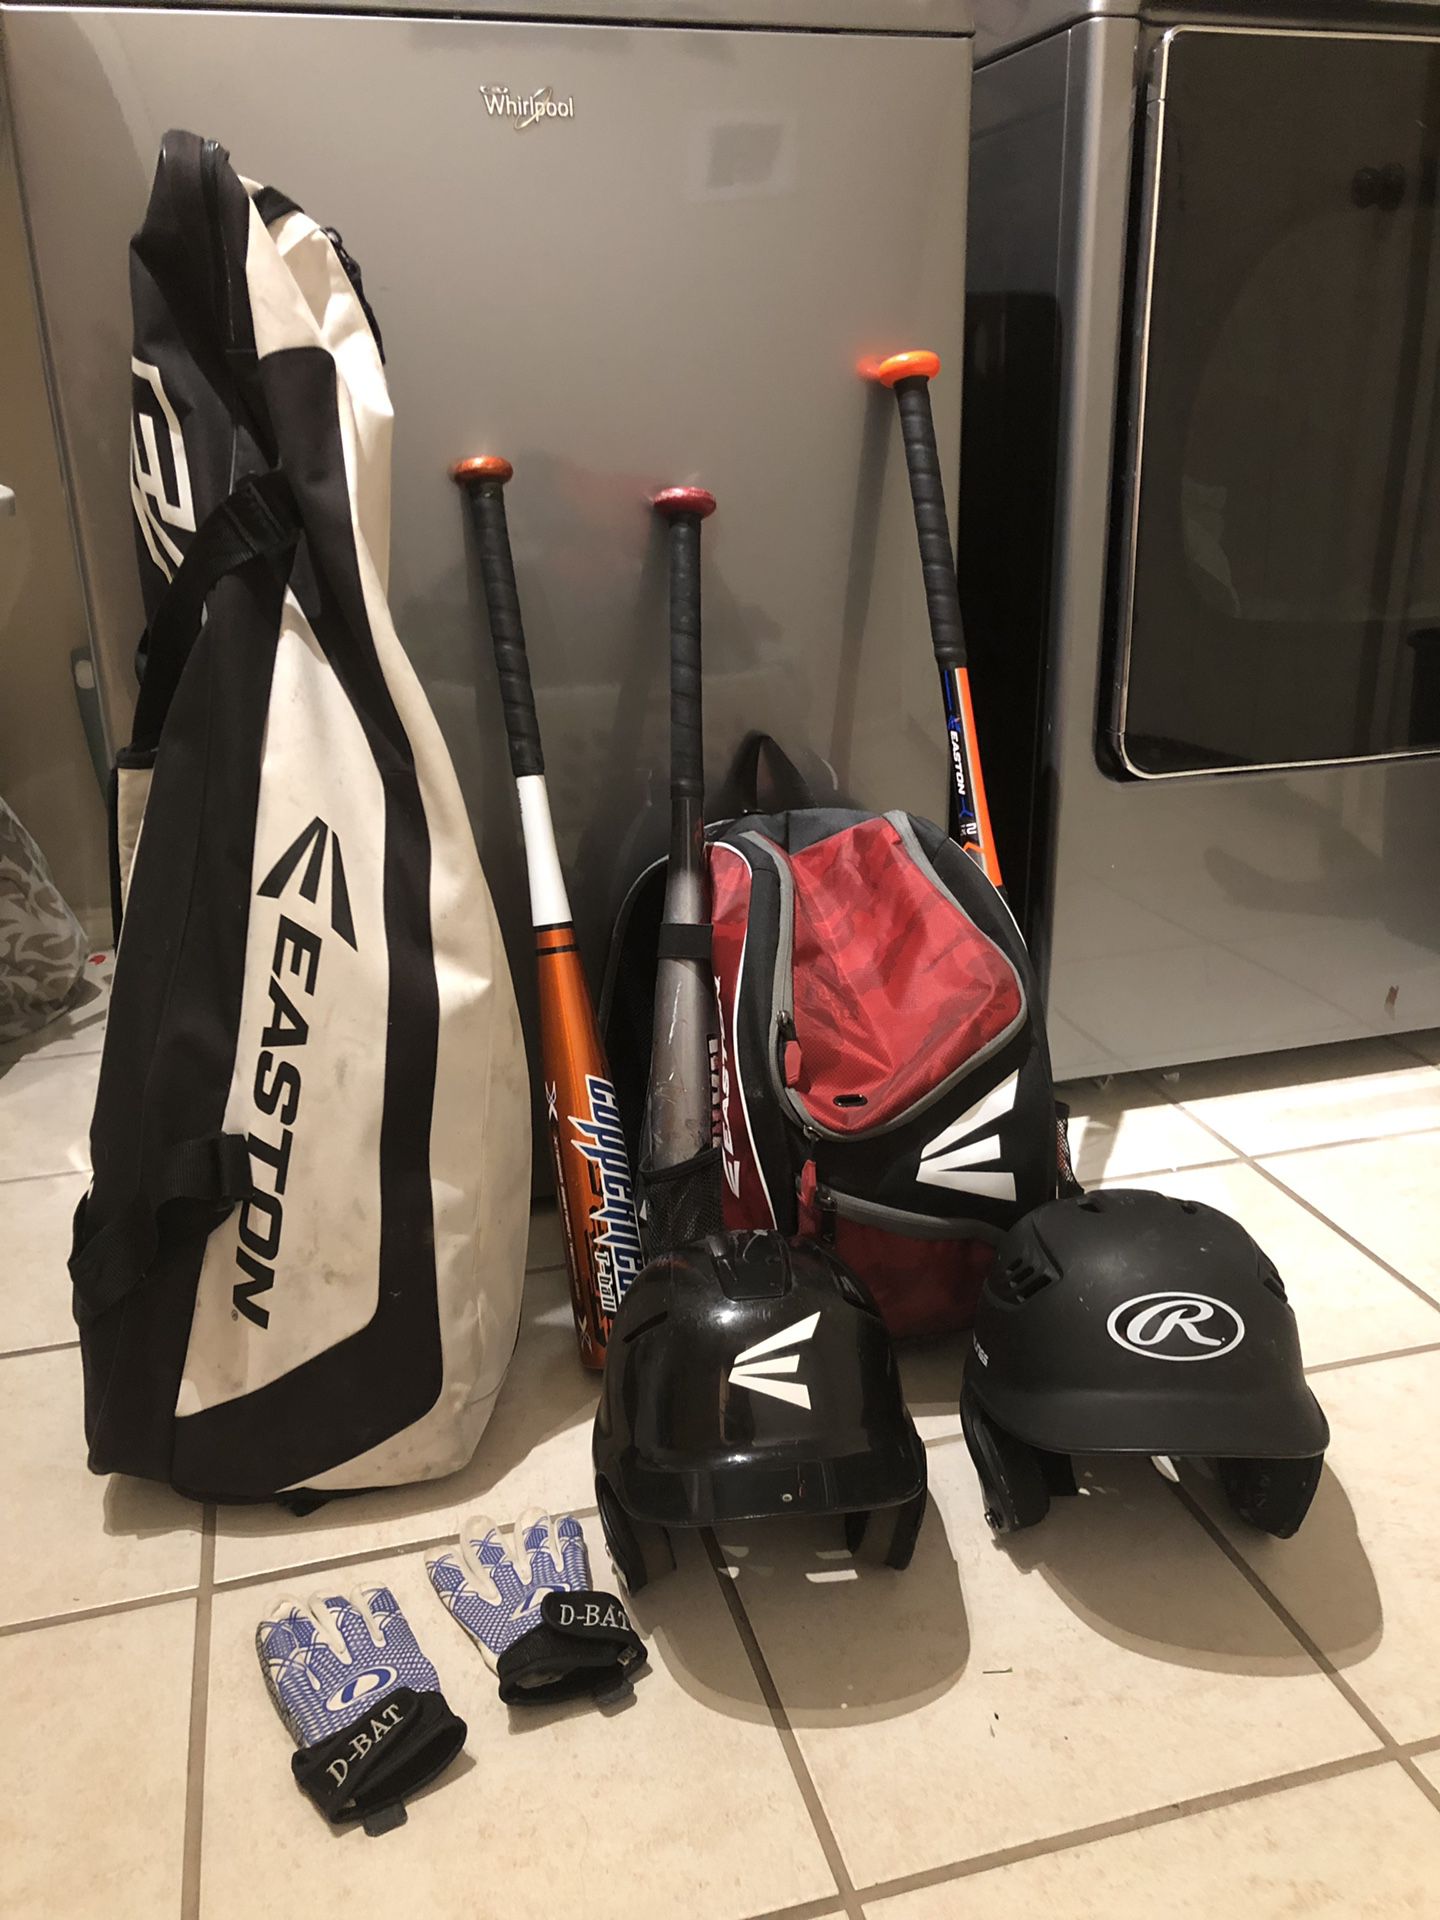 Youth baseball bats, bags, helmets, and gloves